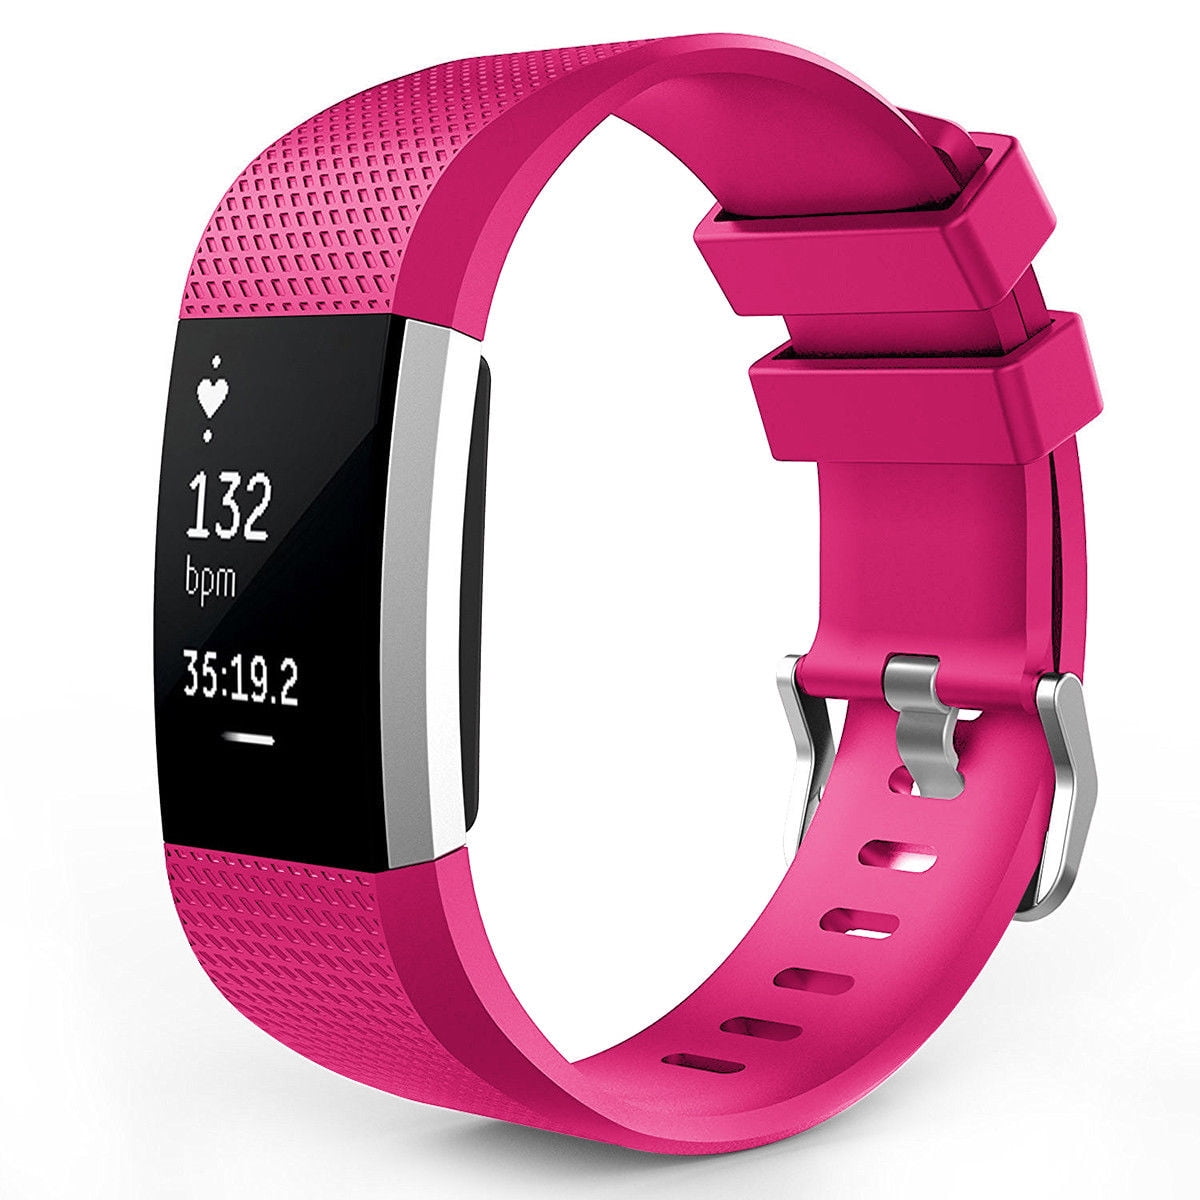 Onn Replacement Band With Metal Buckle For Fitbit Charge 2 Pink 